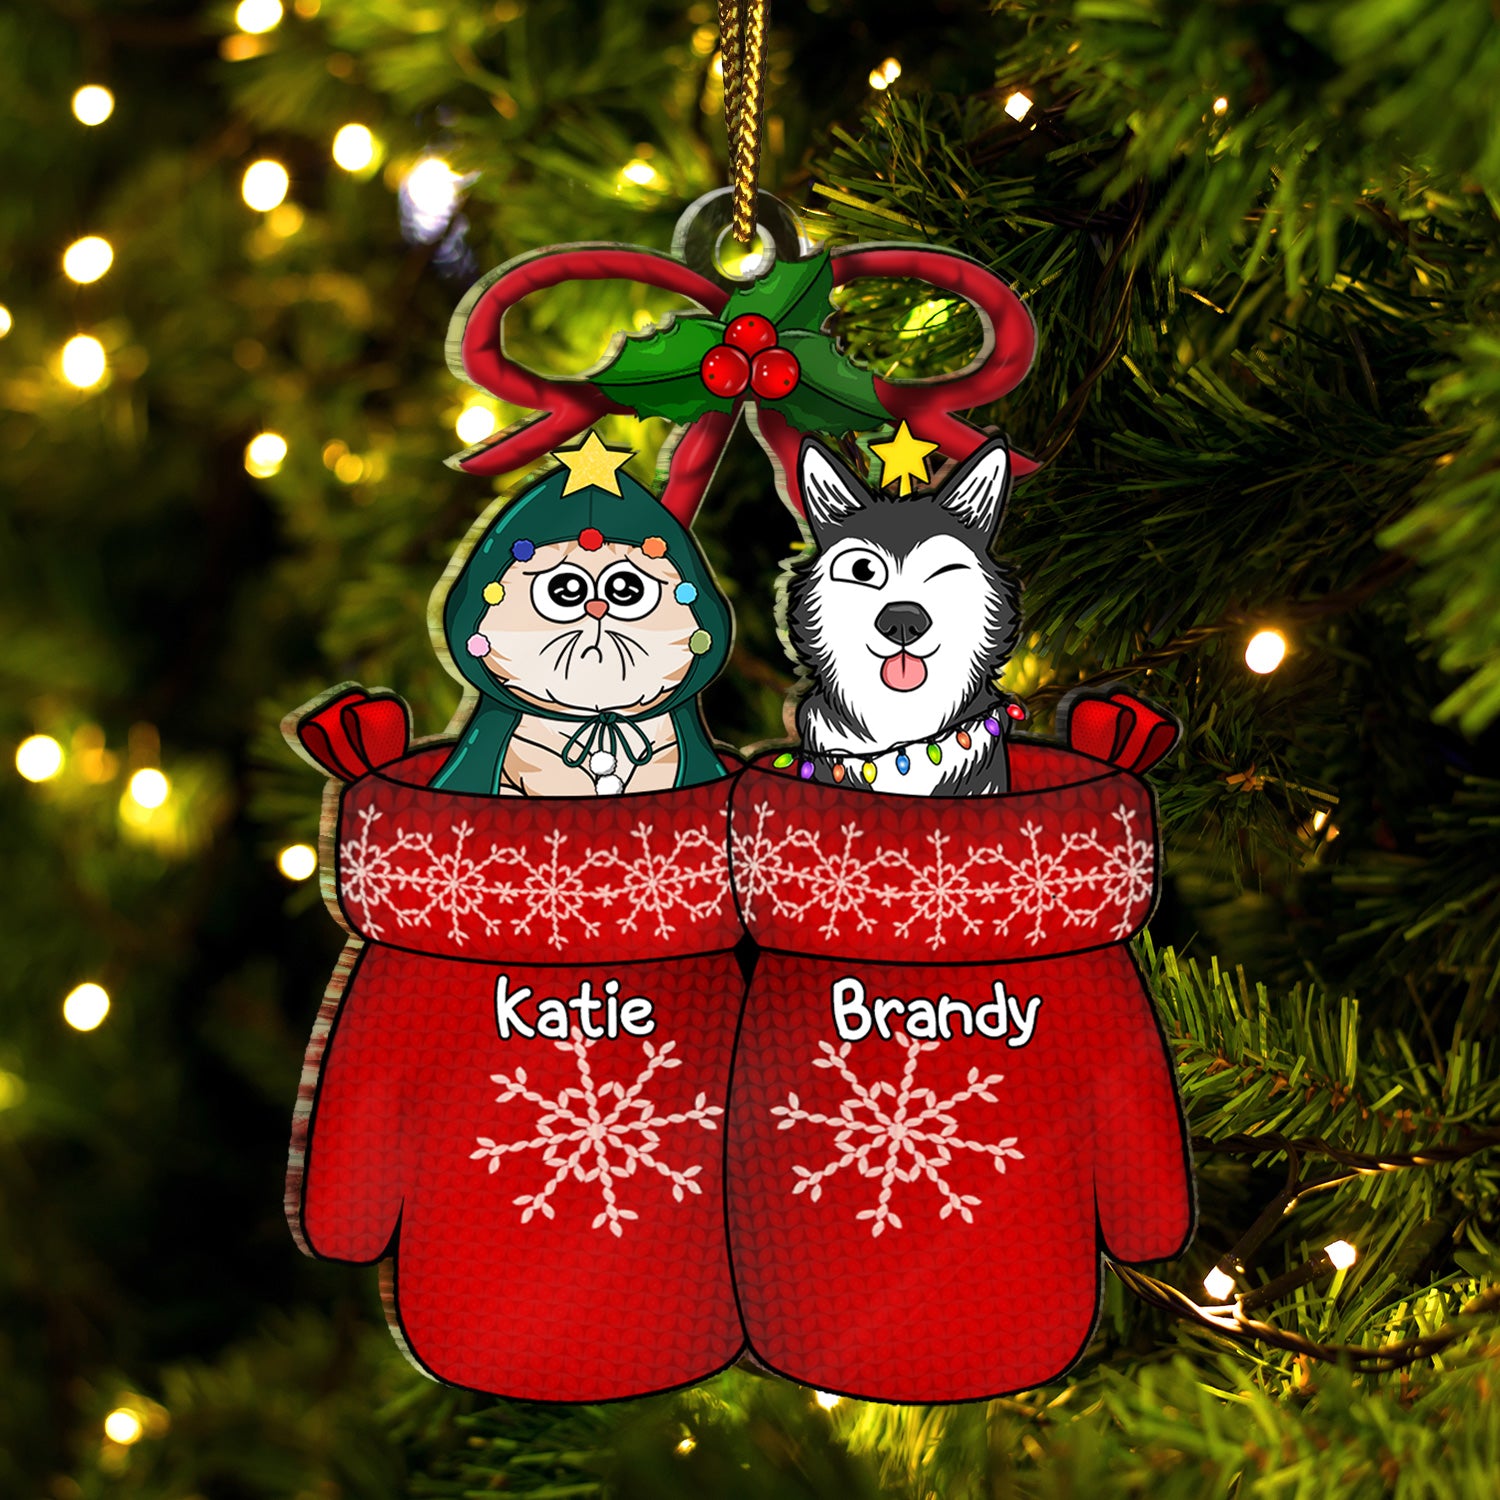 Wool Gloves - Christmas Gift For Dog Lovers, Cat Lovers - Personalized Cutout Acrylic Ornament